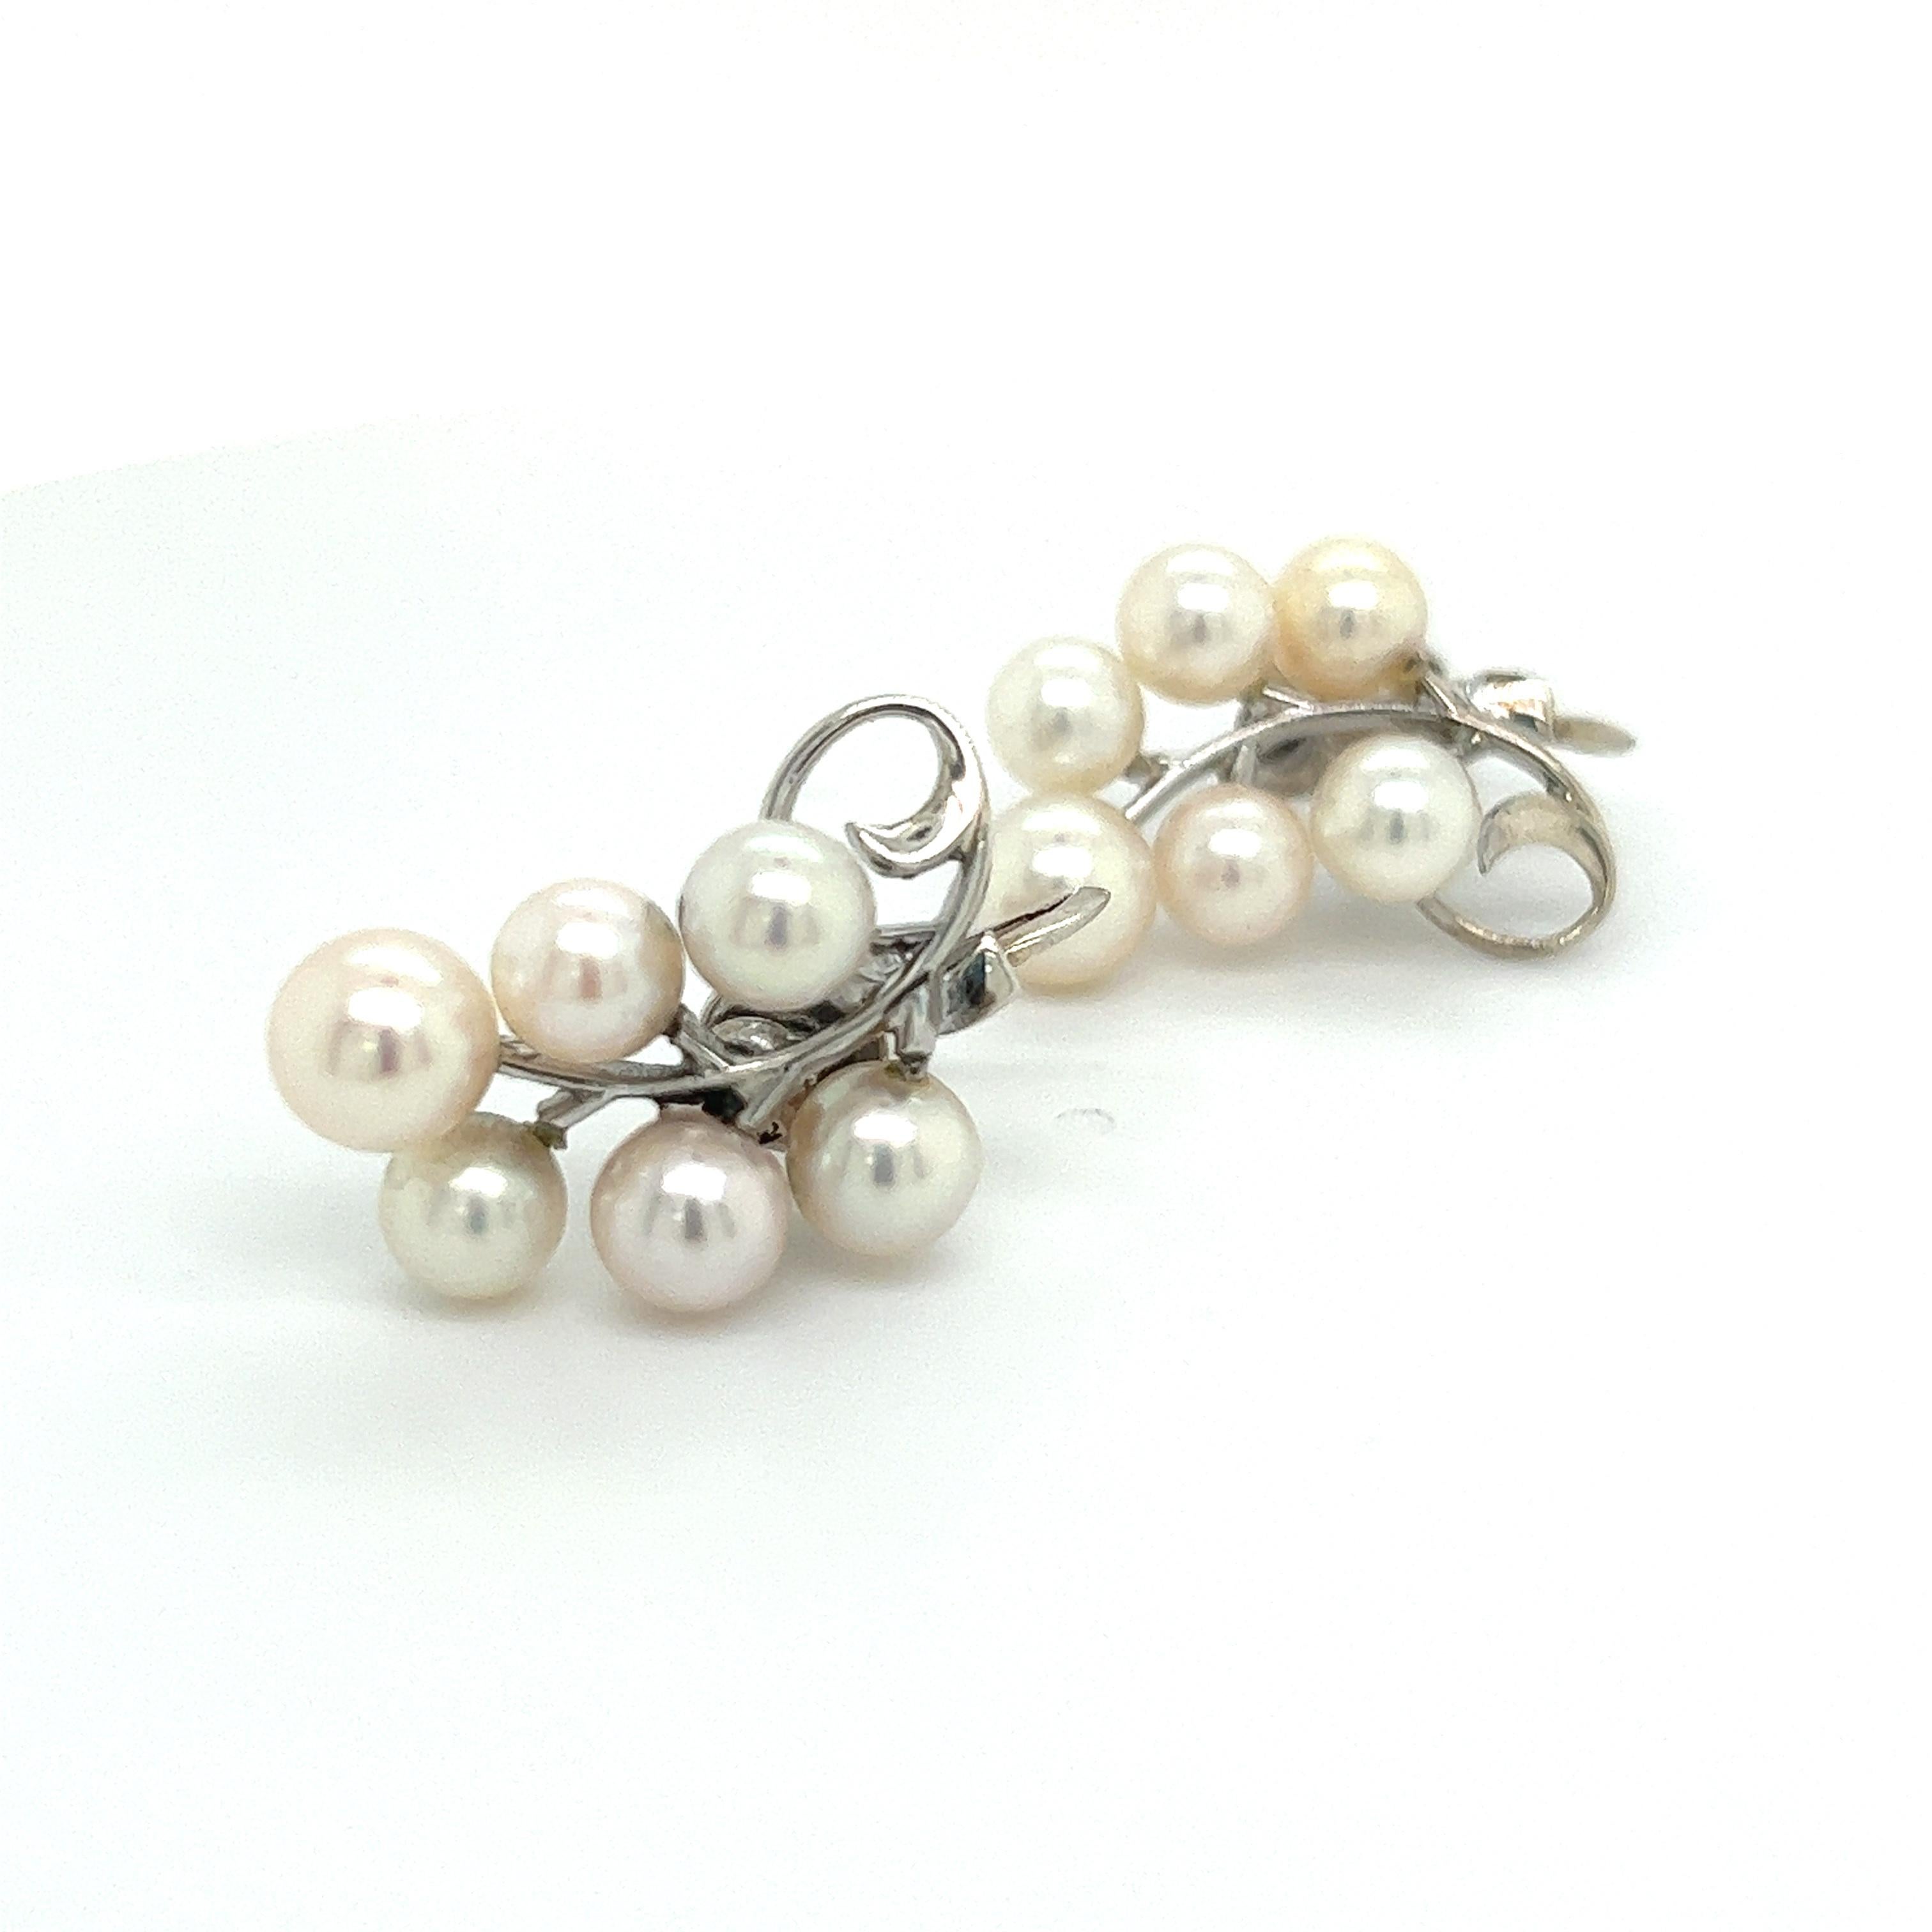 Mikimoto Estate Akoya Pearl Earrings Sterling Silver 6.5 mm M283

Please look at the video attached for this item. With the video, you can see the movement of the item and appreciate the faceting and details better.

These elegant Authentic Mikimoto